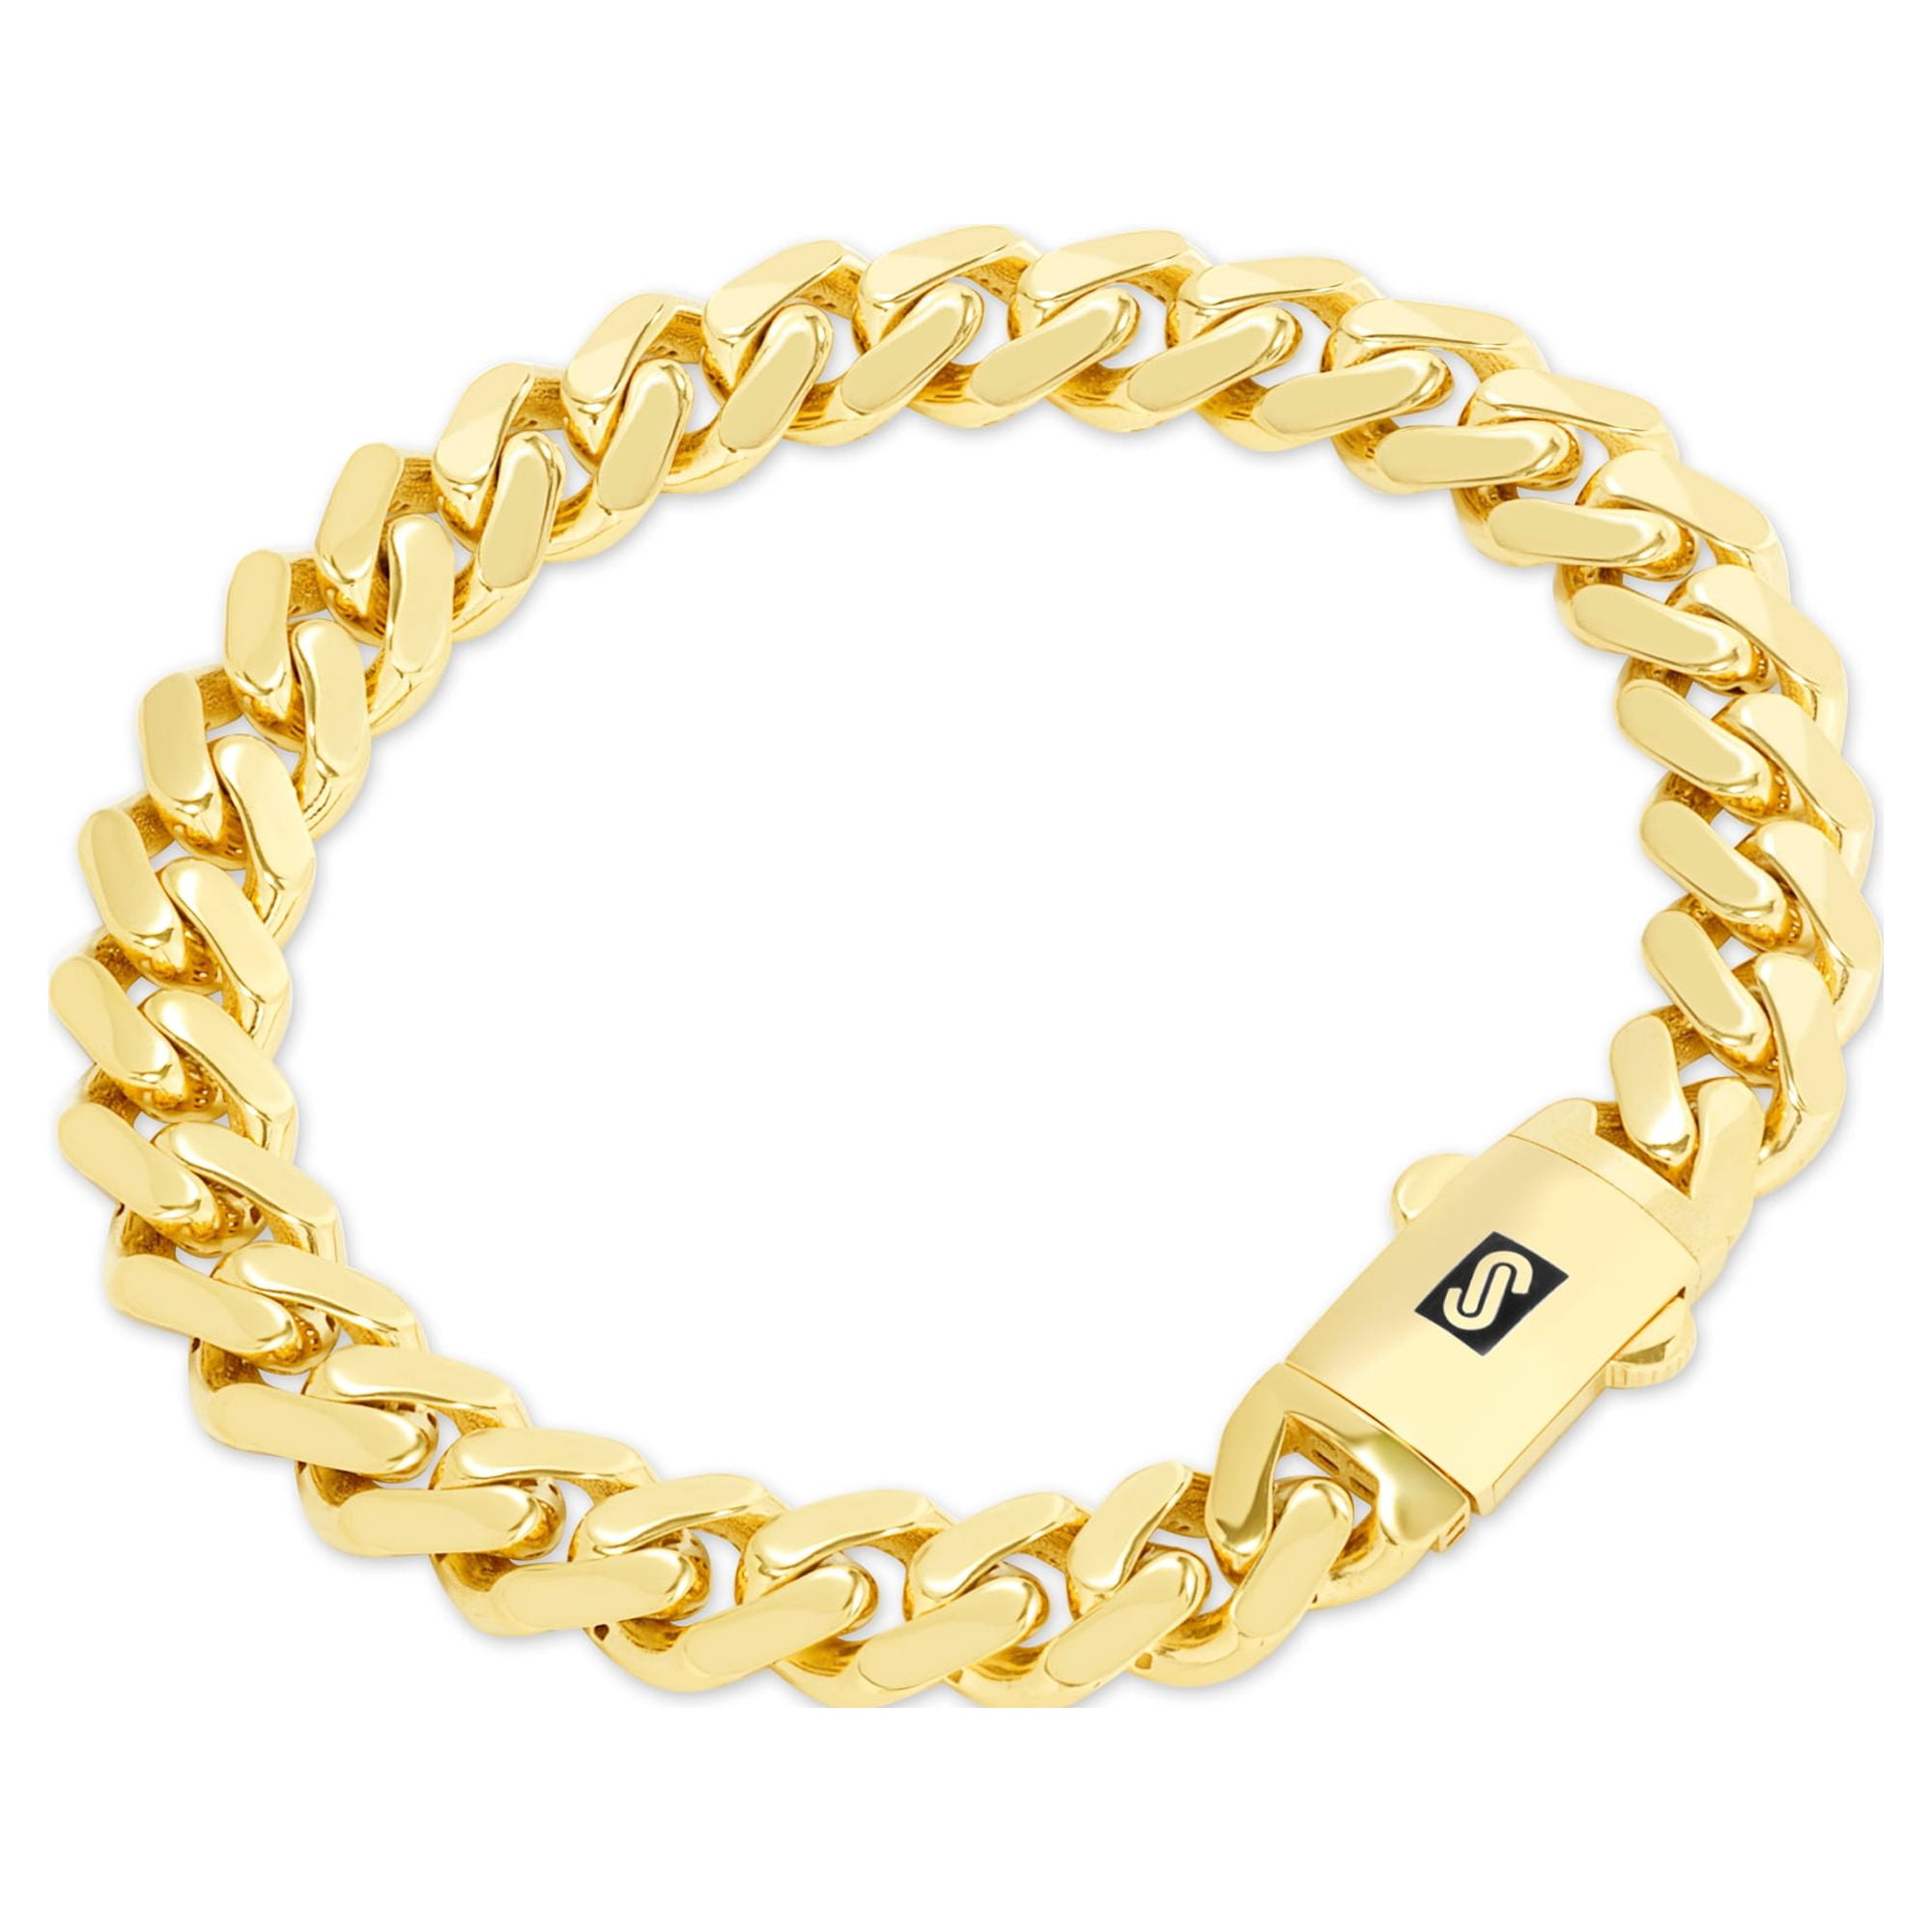 Beautiful Sterling Silver Cuban Link Chain Bracelet in 5mm (Gauge 150)  width. Available in 7 and 8 Lengths.